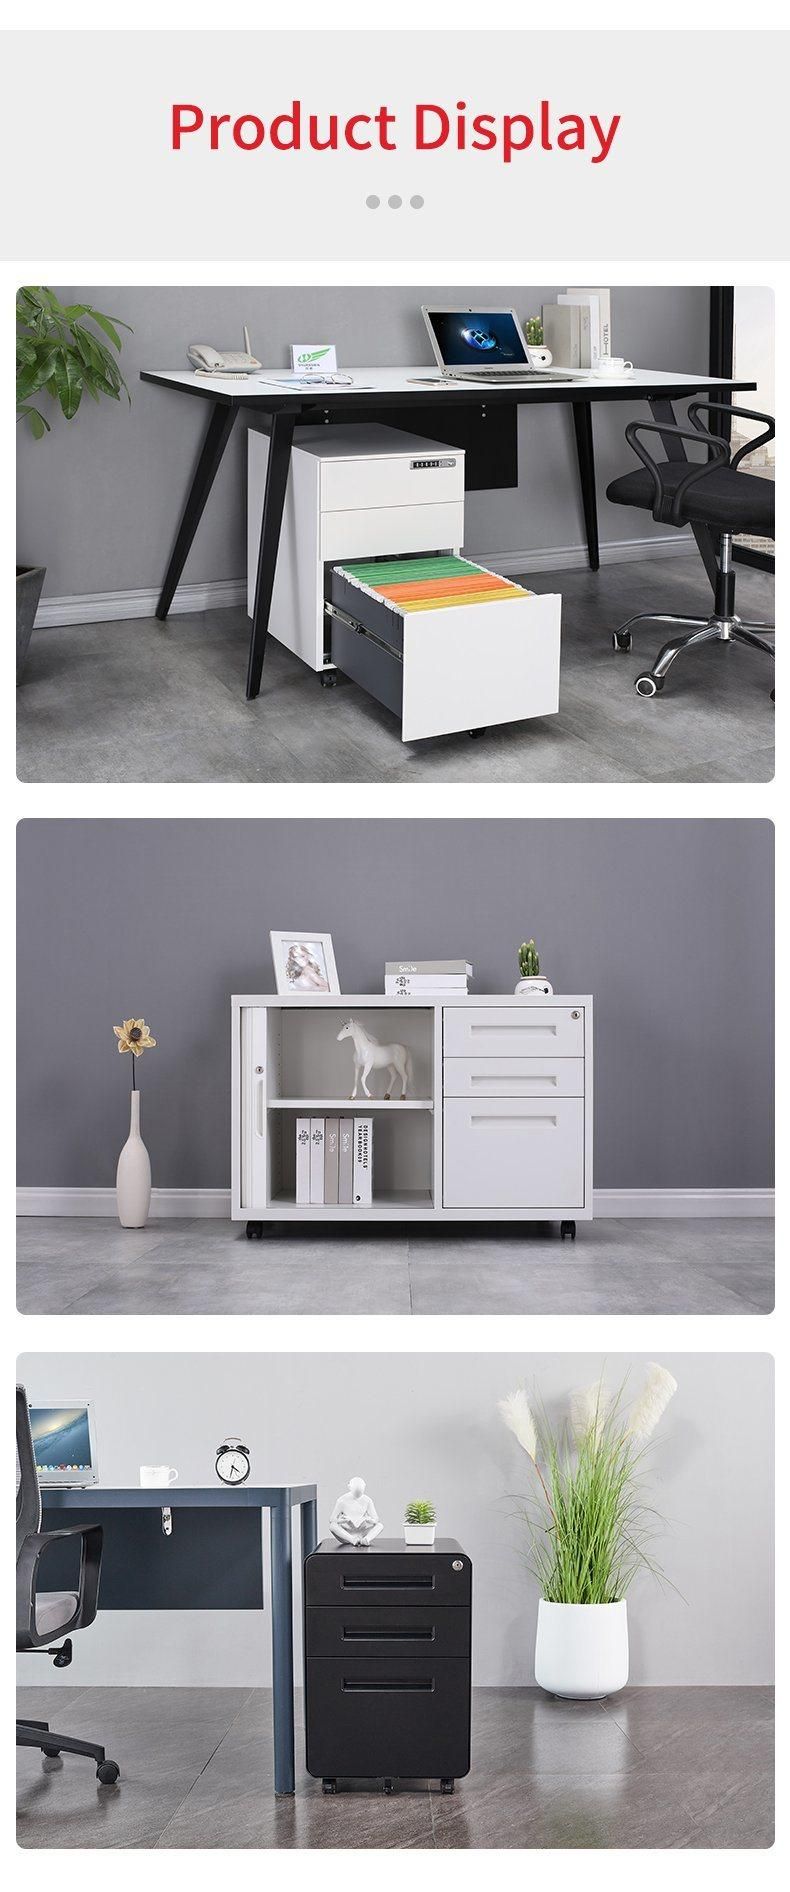 Modern Simple Office 3 Drawer Metal Hand Mobile Cabinet